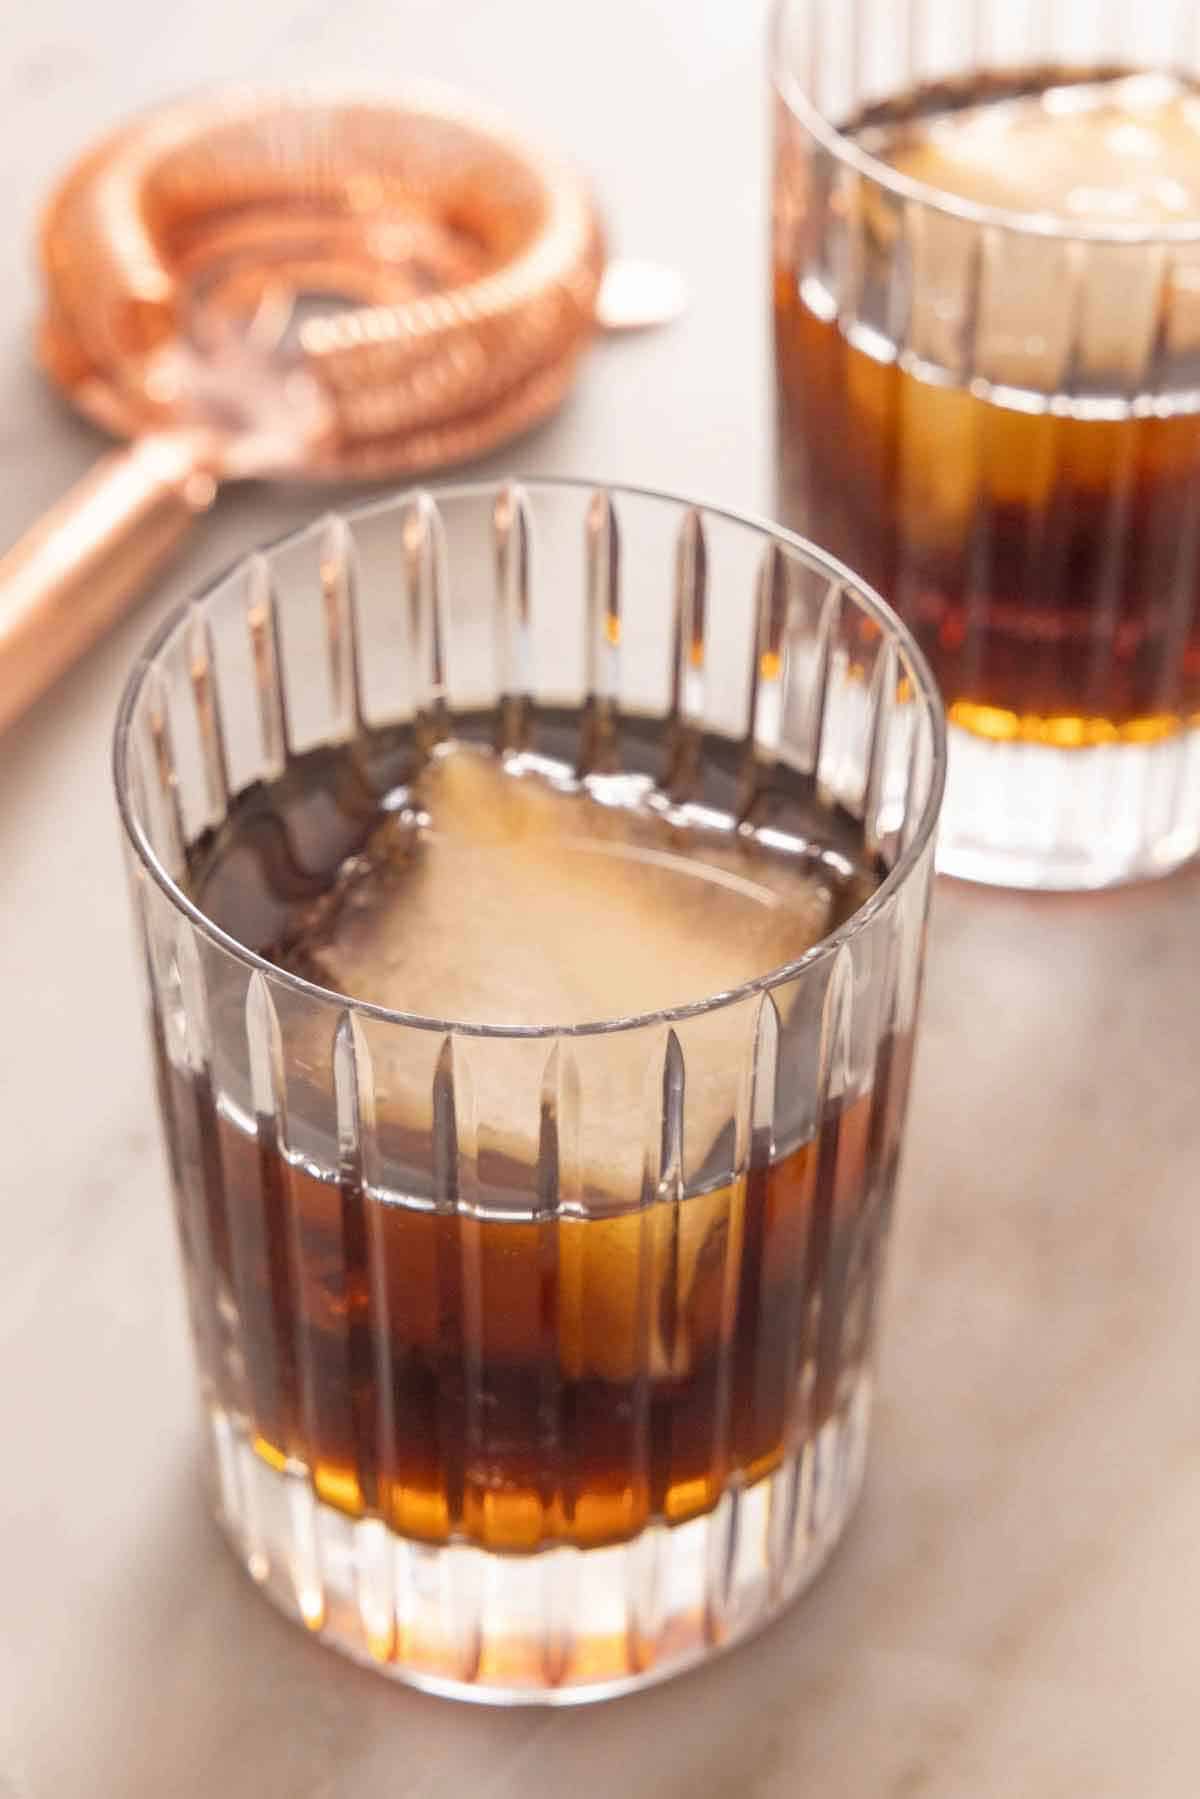 A glass of Black Russian with one square ice cube. A second one in the background along with a cocktail strainer.